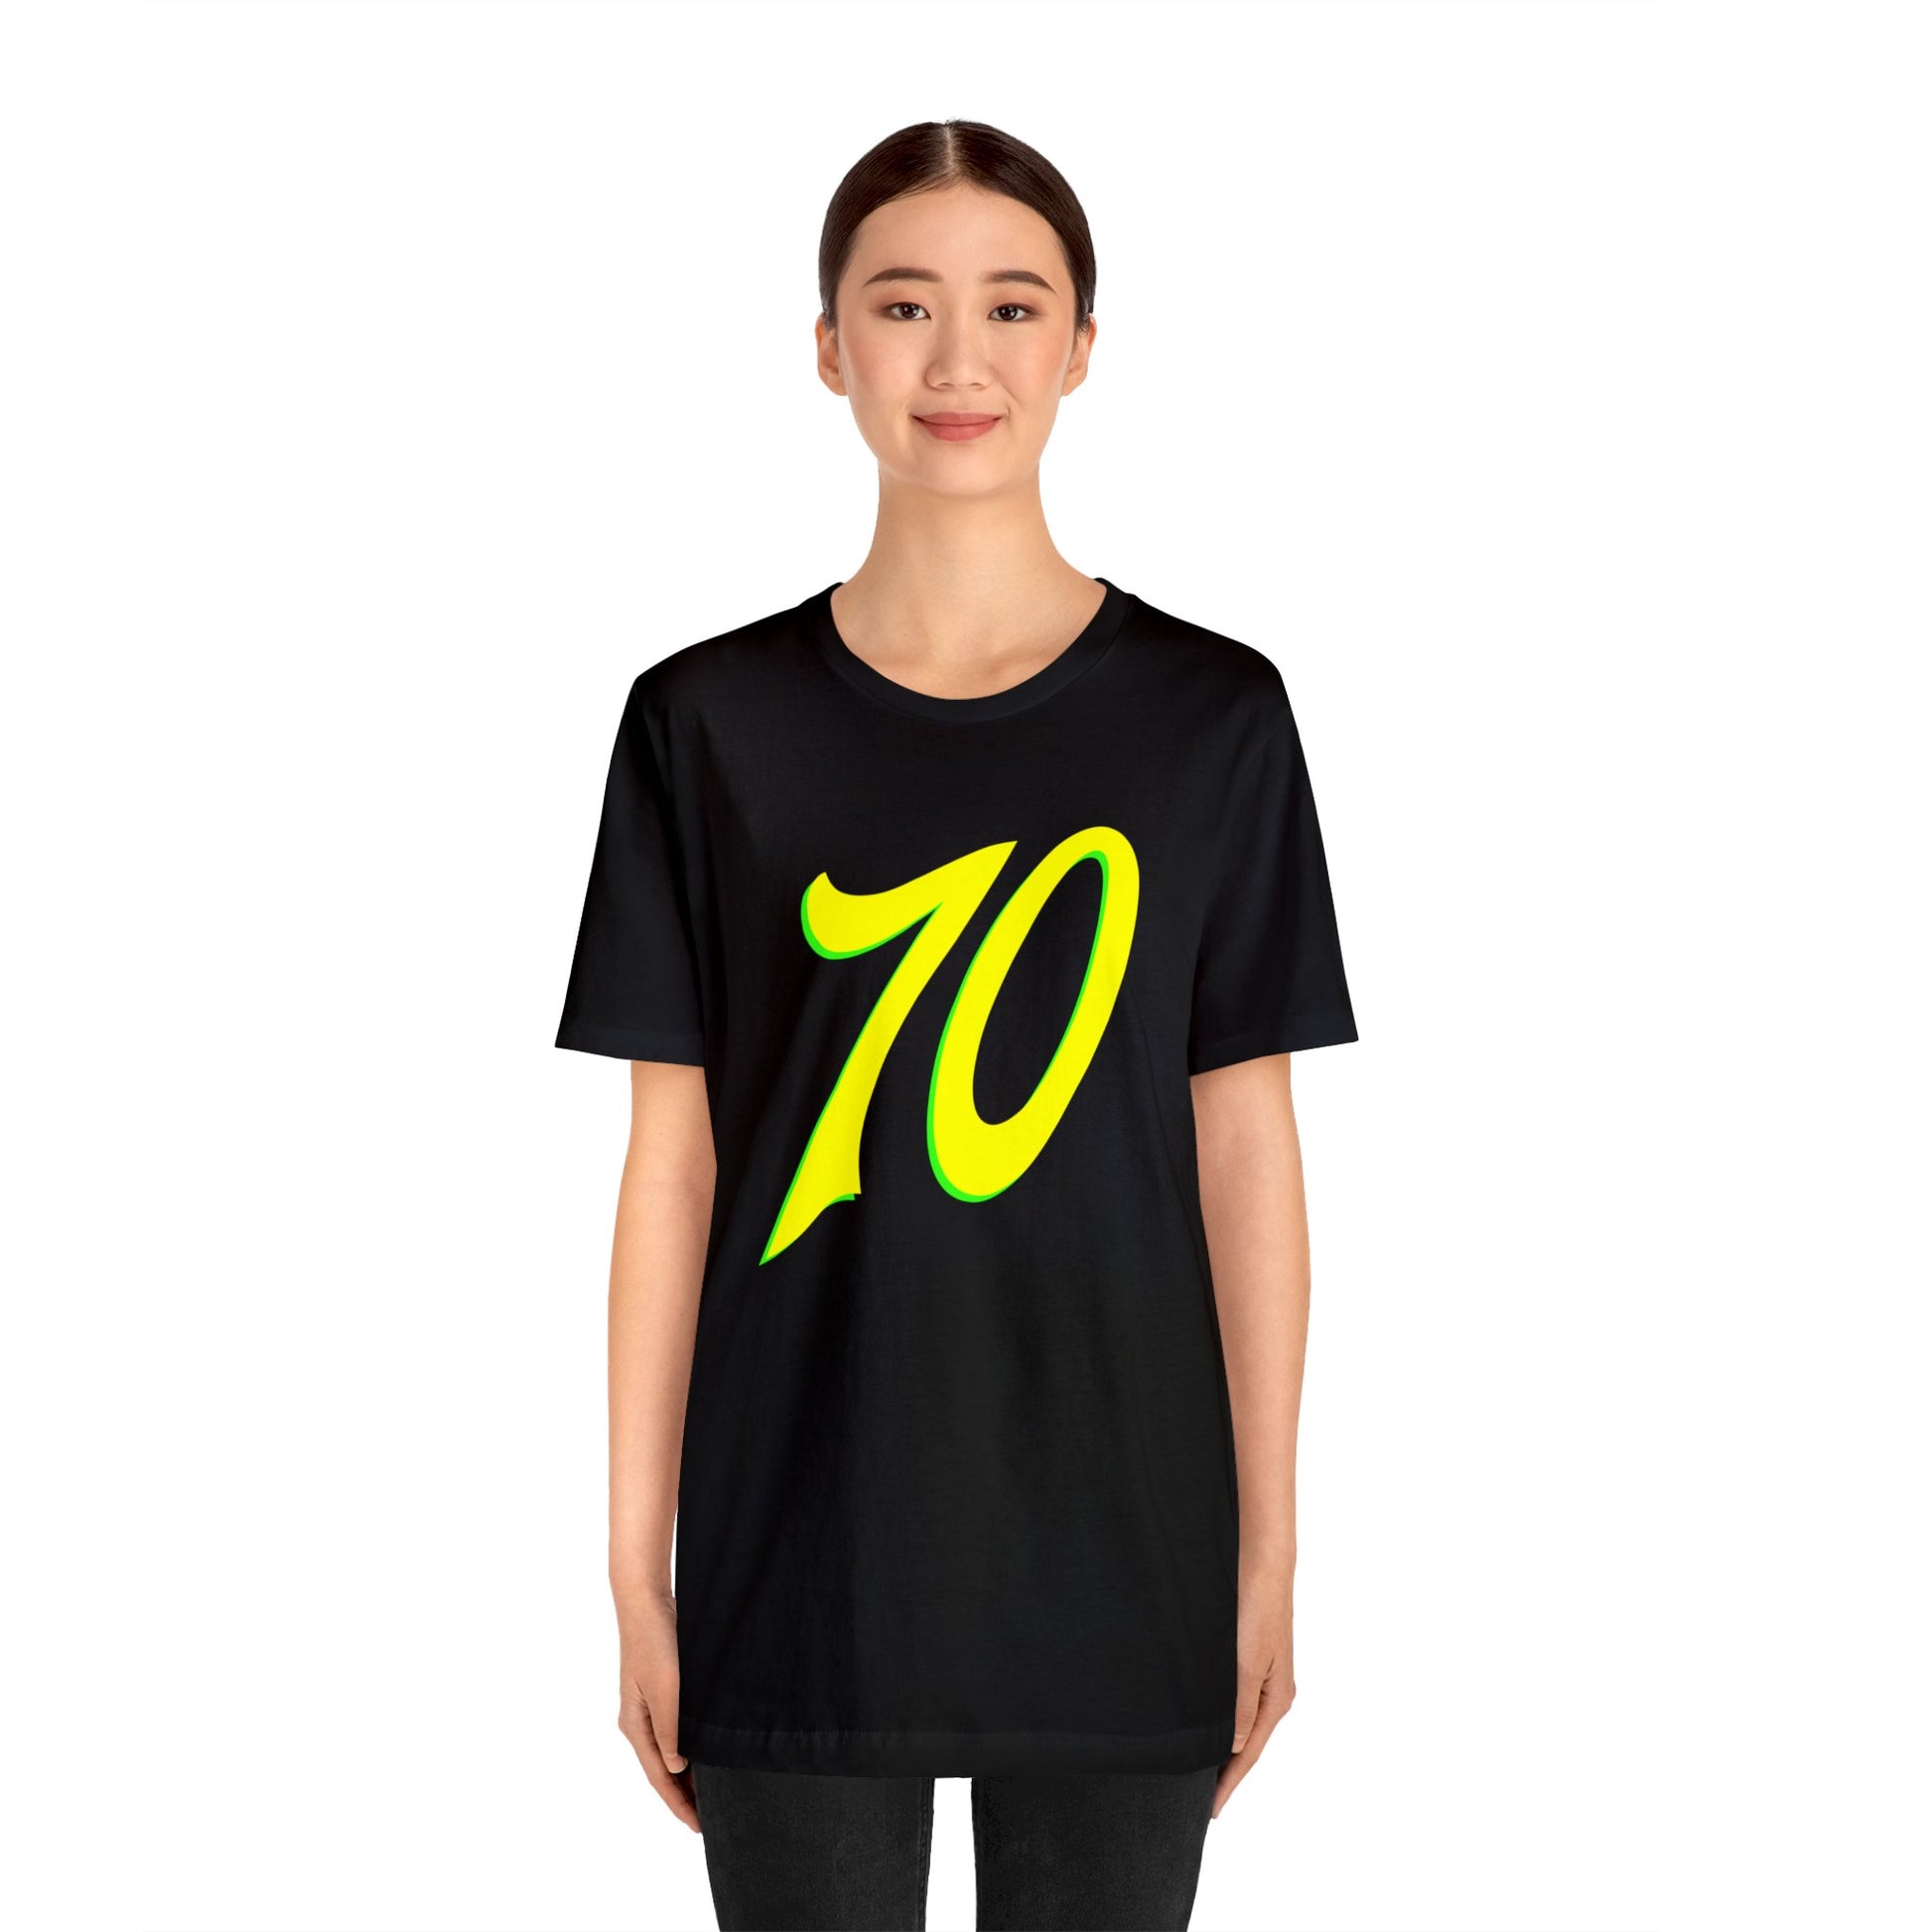 Number 70 Design - Soft Cotton Tee for birthdays and celebrations, Gift for friends and family, Multiple Options by clothezy.com in Asphalt Size Medium - Buy Now